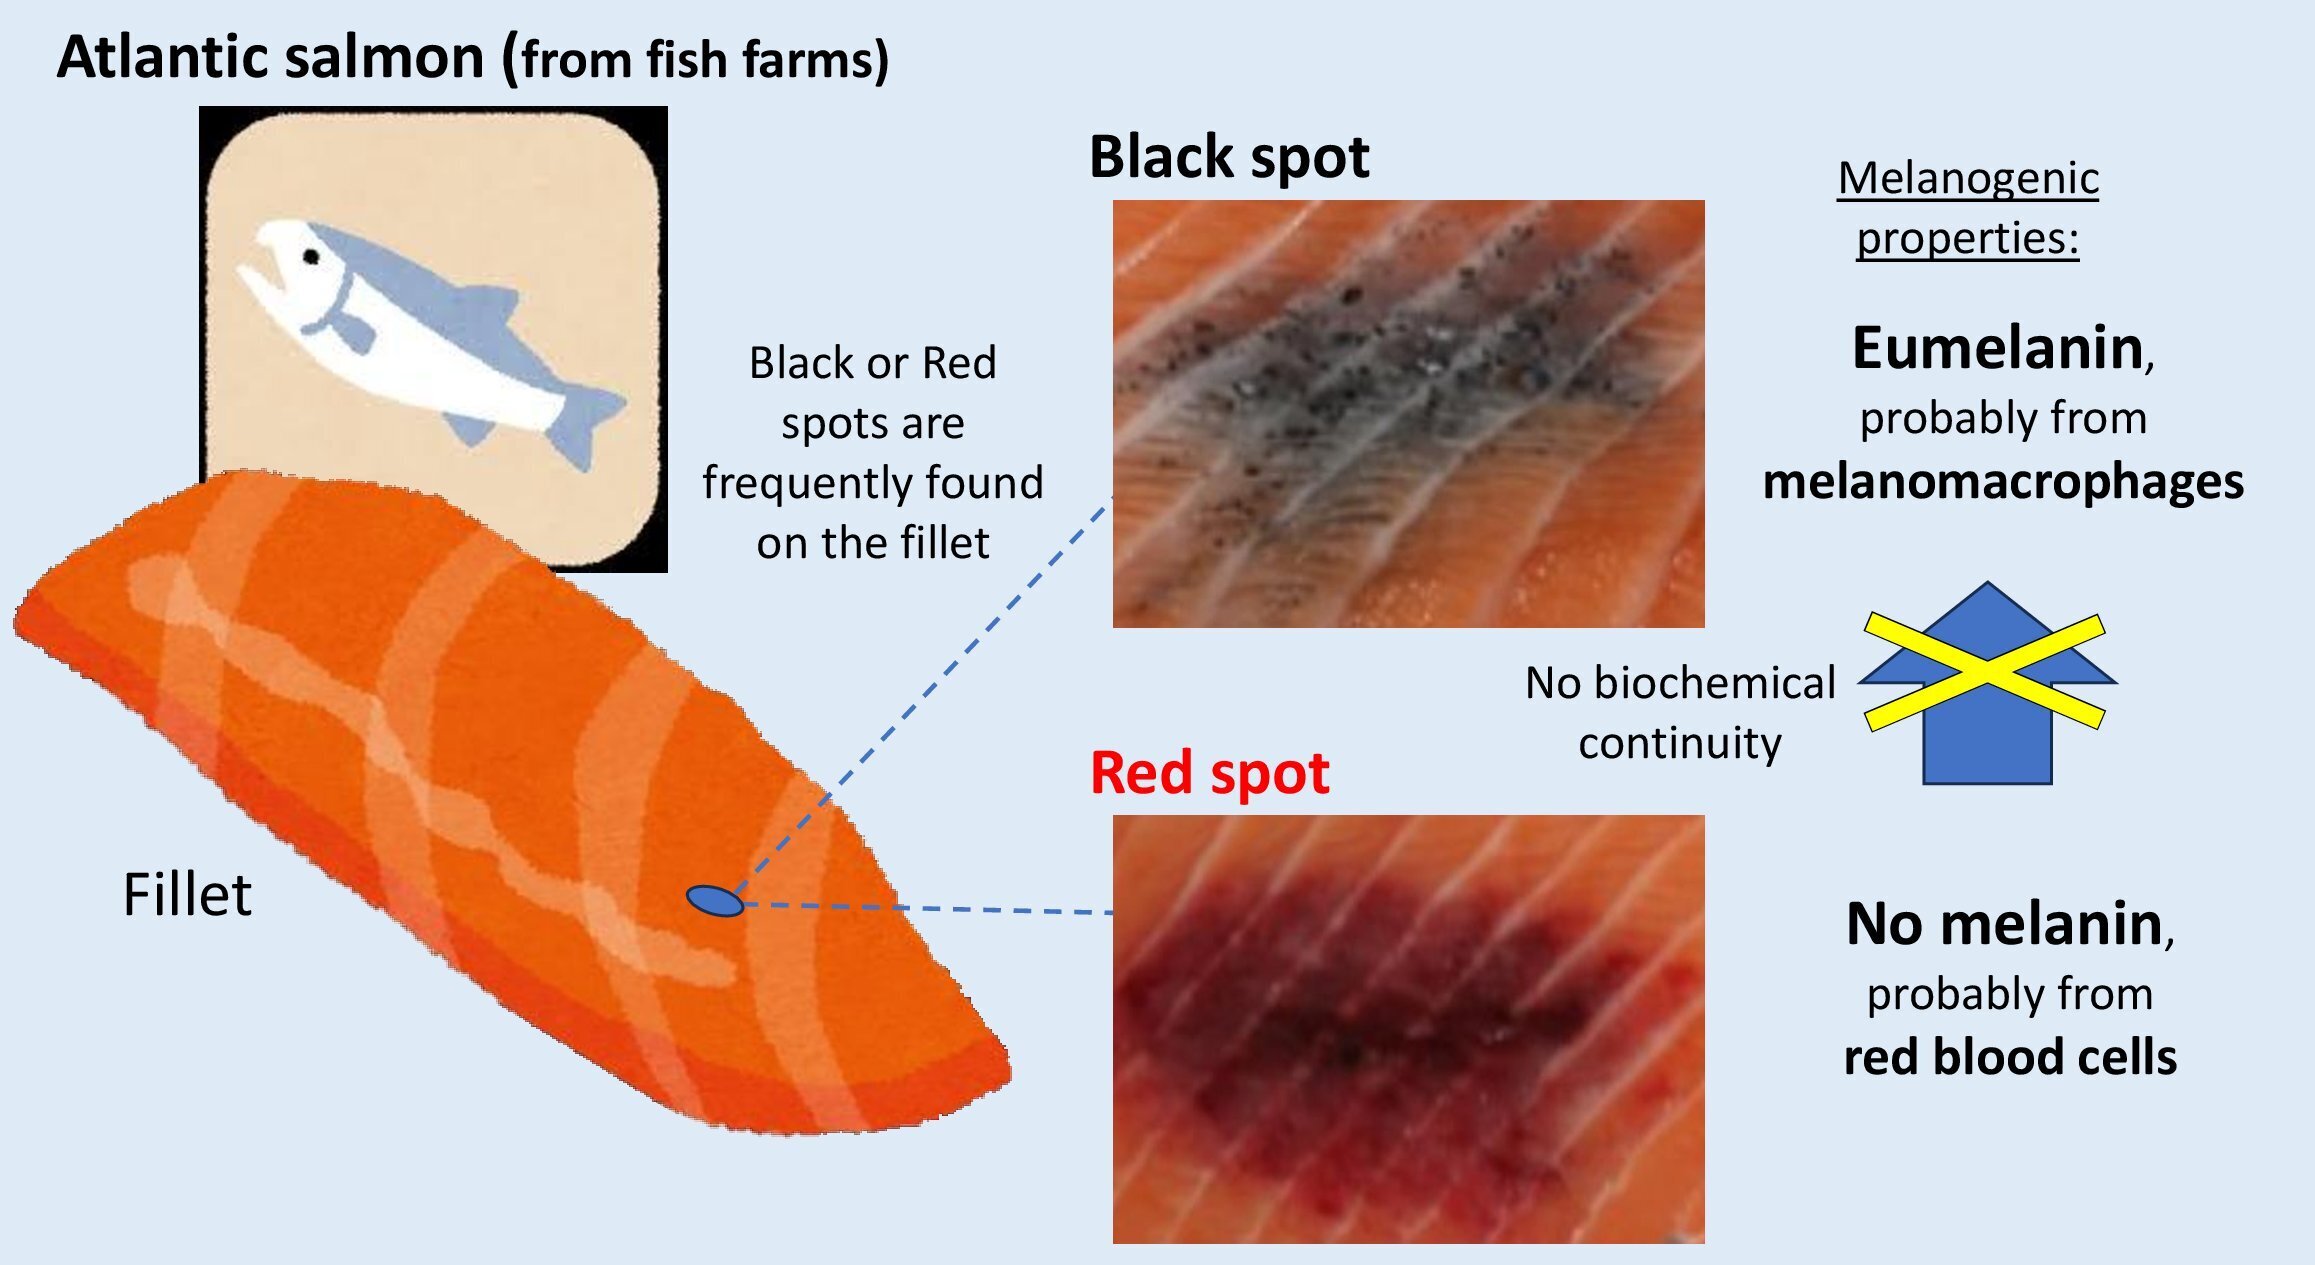 It turns out that the black spots on salmon fillets contain melanin